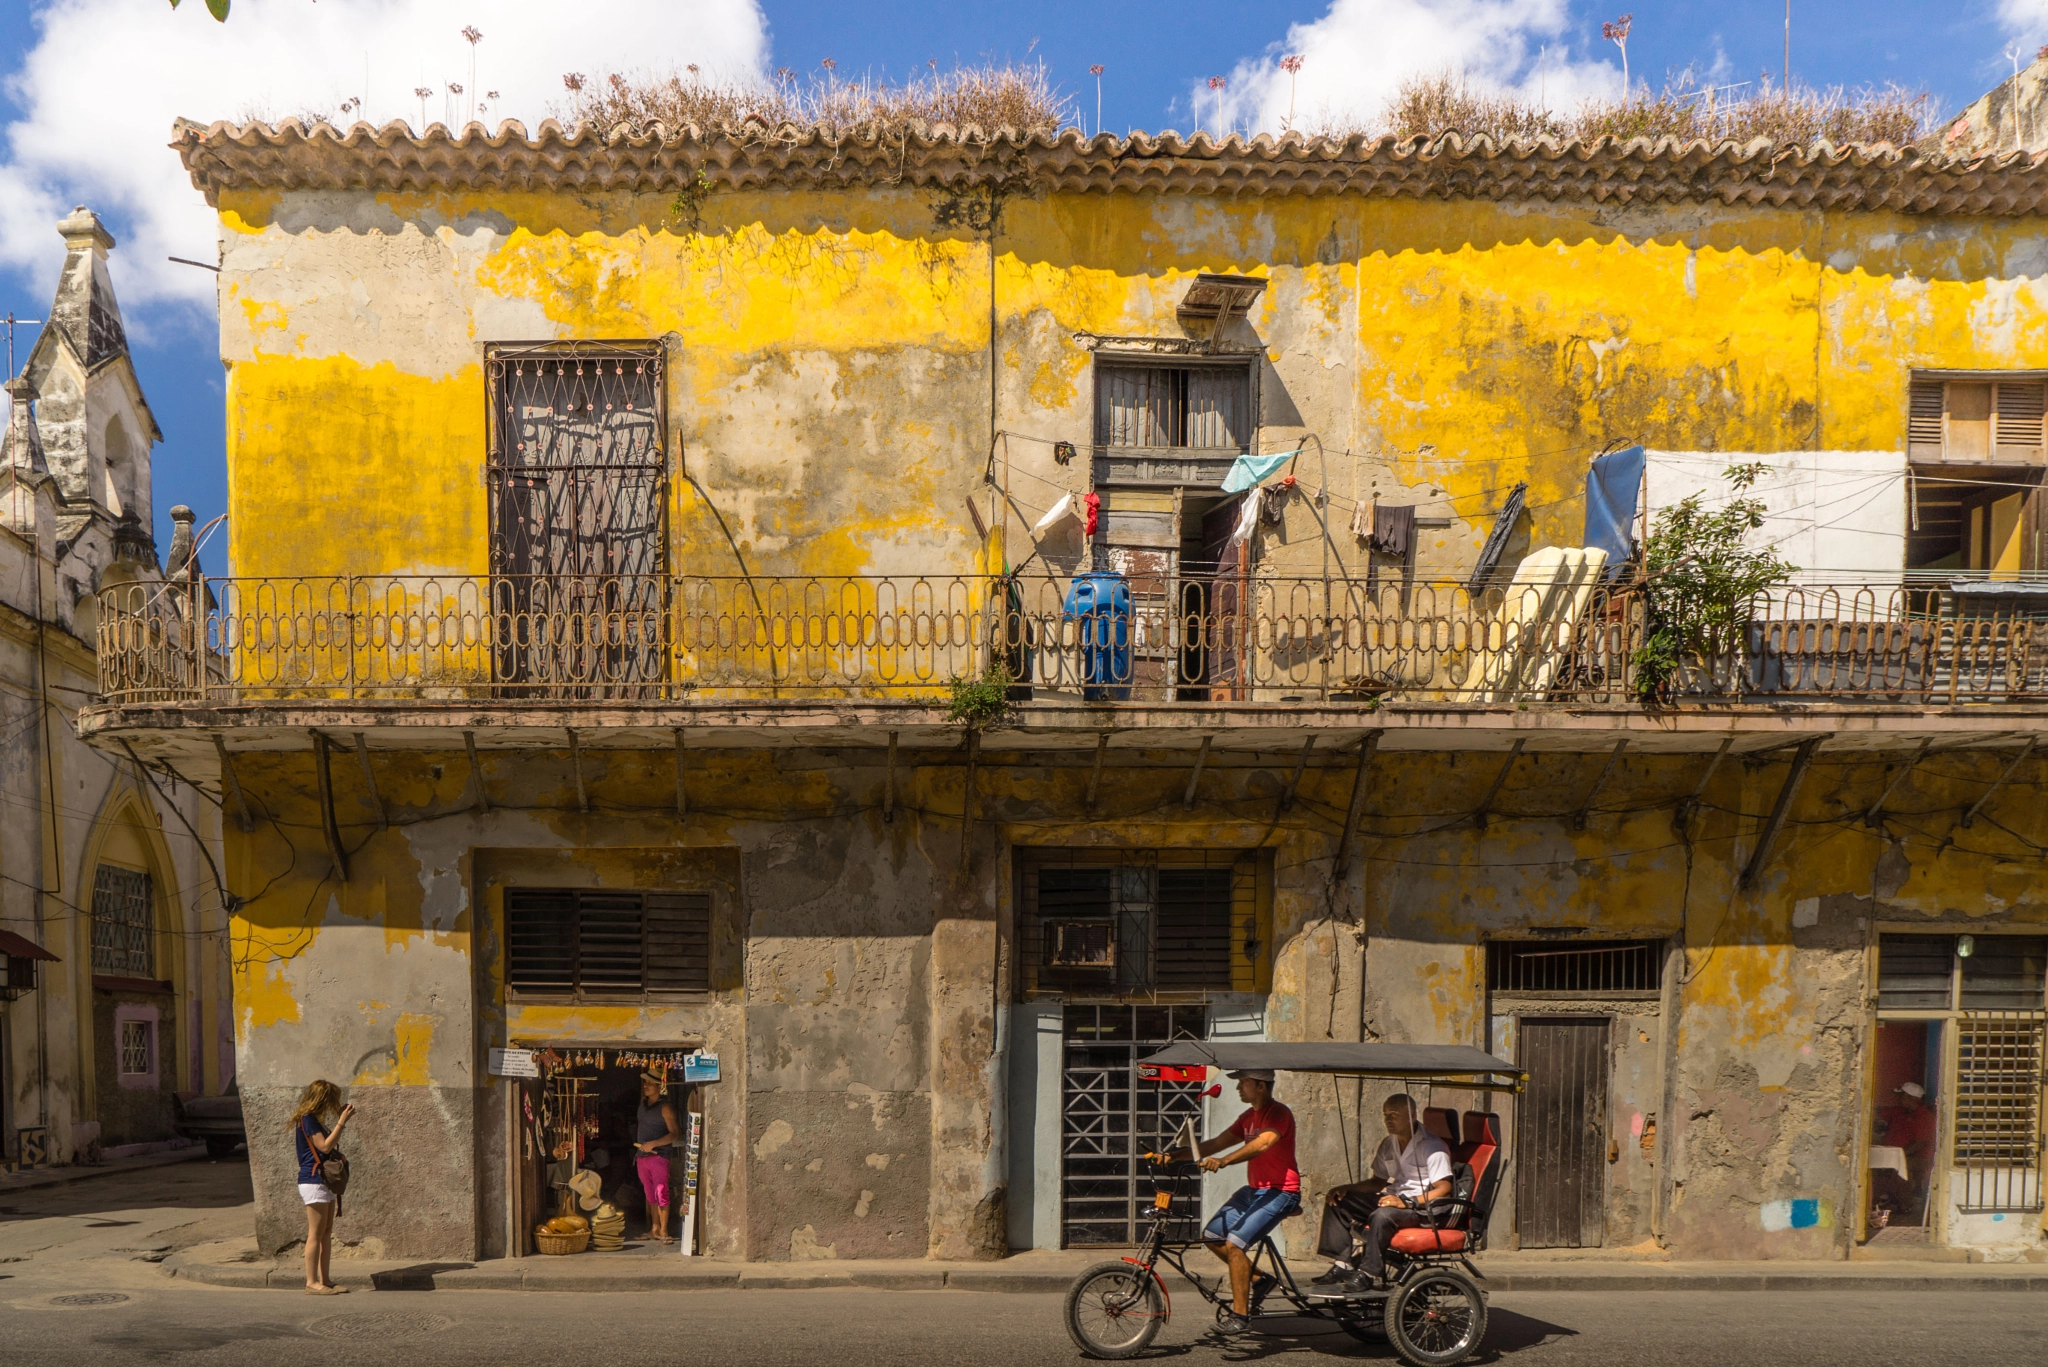 Sony a7R sample photo. An havana that is being lost.. photography